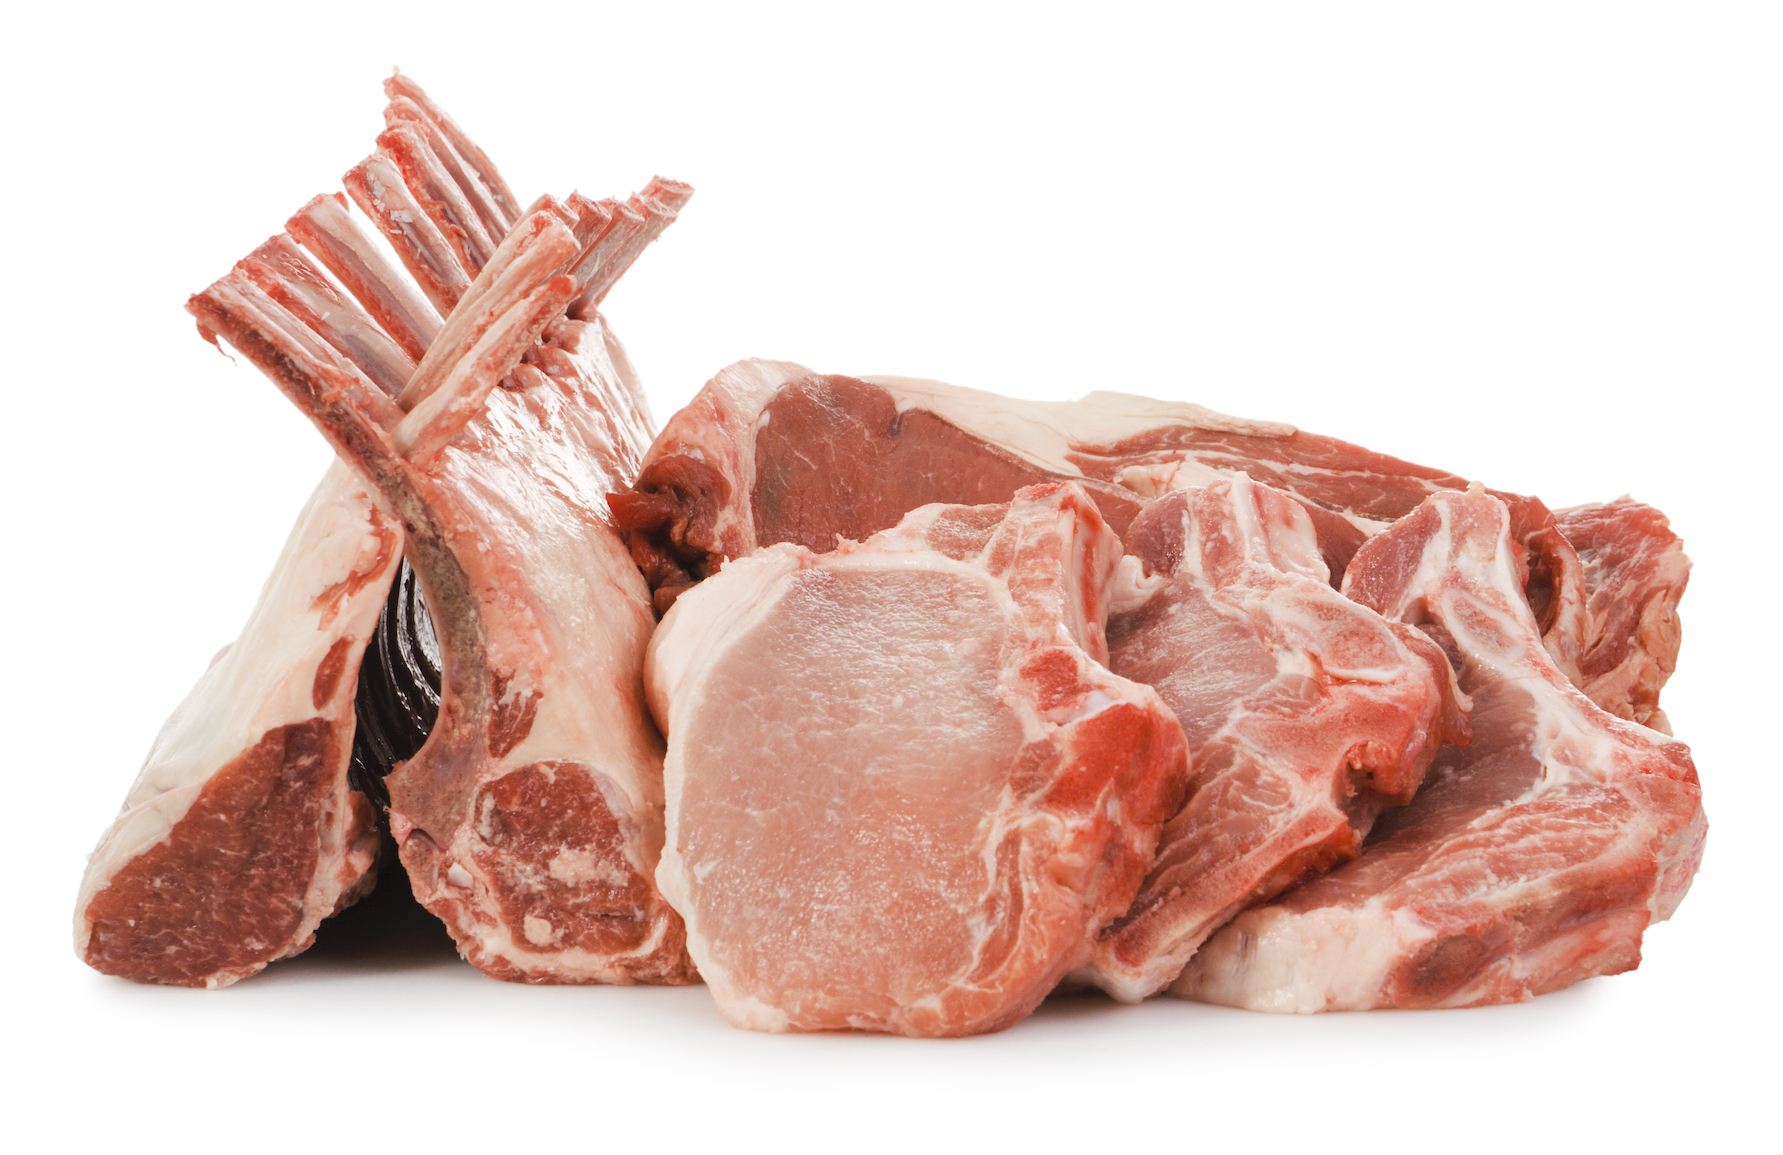 Cuts of pork on a white background